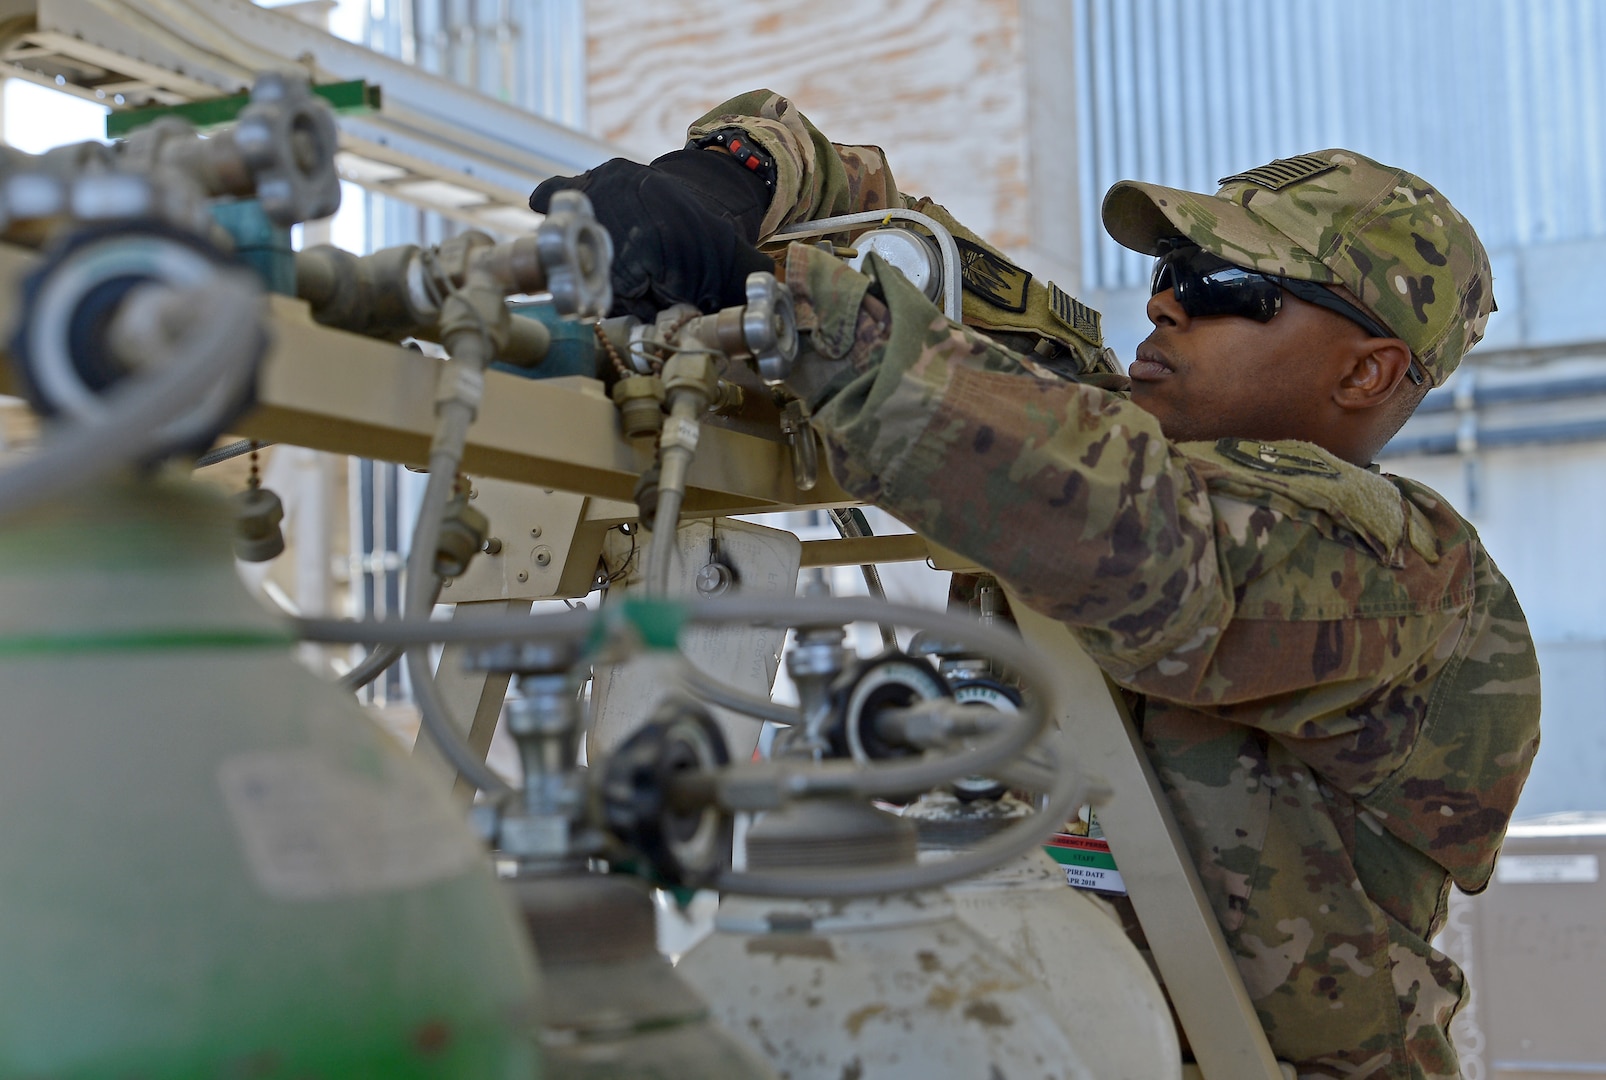 Tech. Sgt. Richard Smith, 455th Expeditionary Medical Operation Squadron clinical engineering NCOIC, checks an oxygen tank Jan. 15, 2018 at Craig Joint Theater Hospital in Bagram Airfield, Afghanistan.